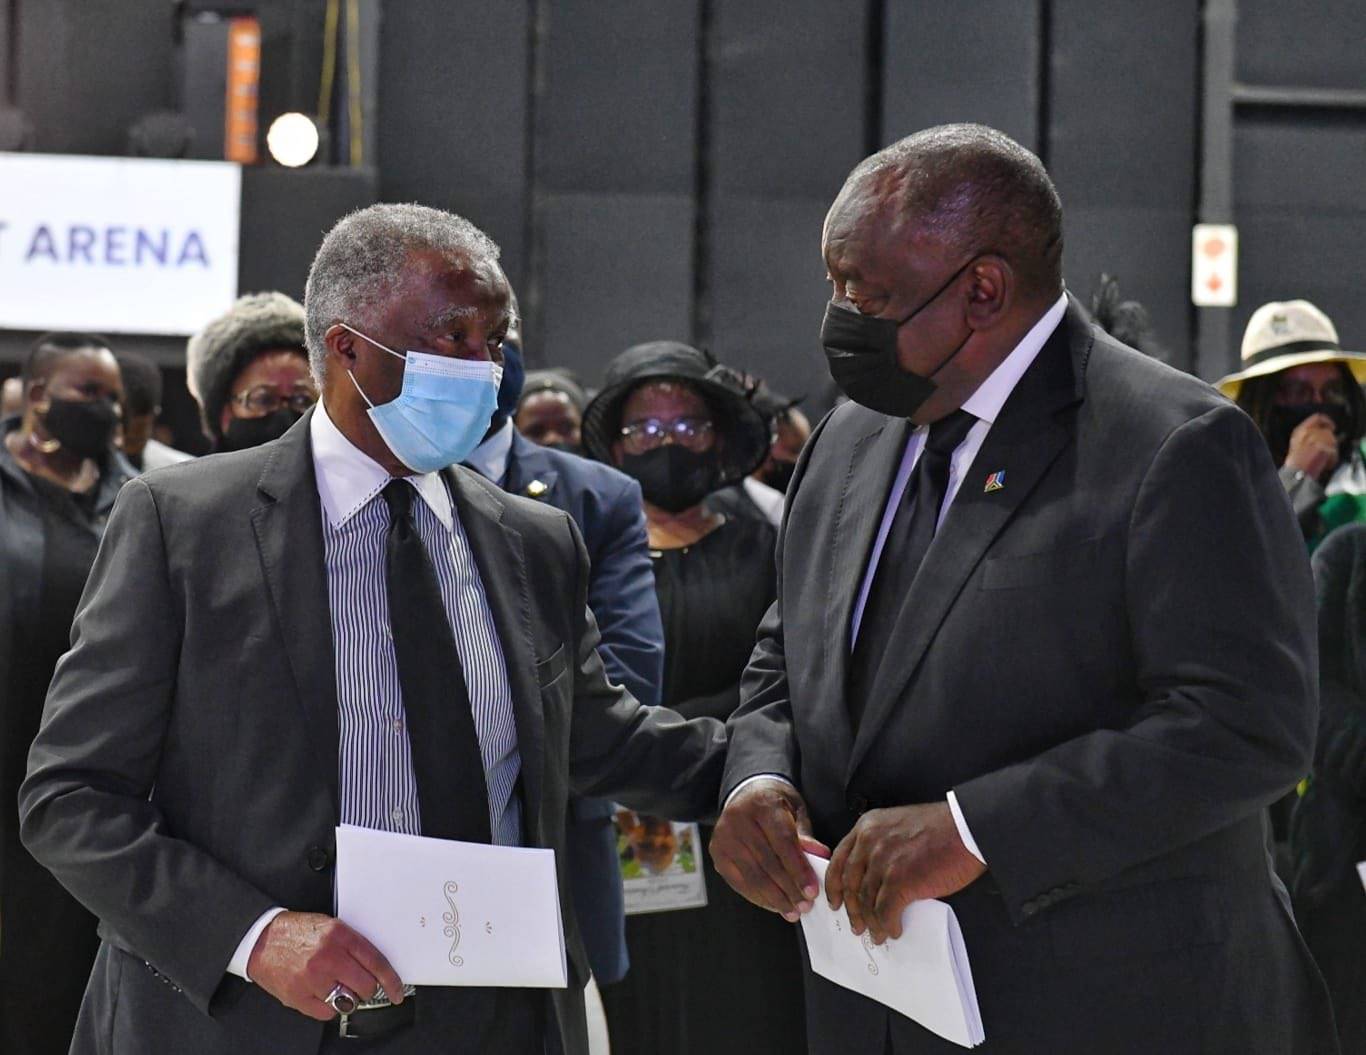 No love lost | Former president Thabo Mbeki and President Cyril Ramaphosa attended the funeral of Ambassador Silumko Sokupa in May this year.